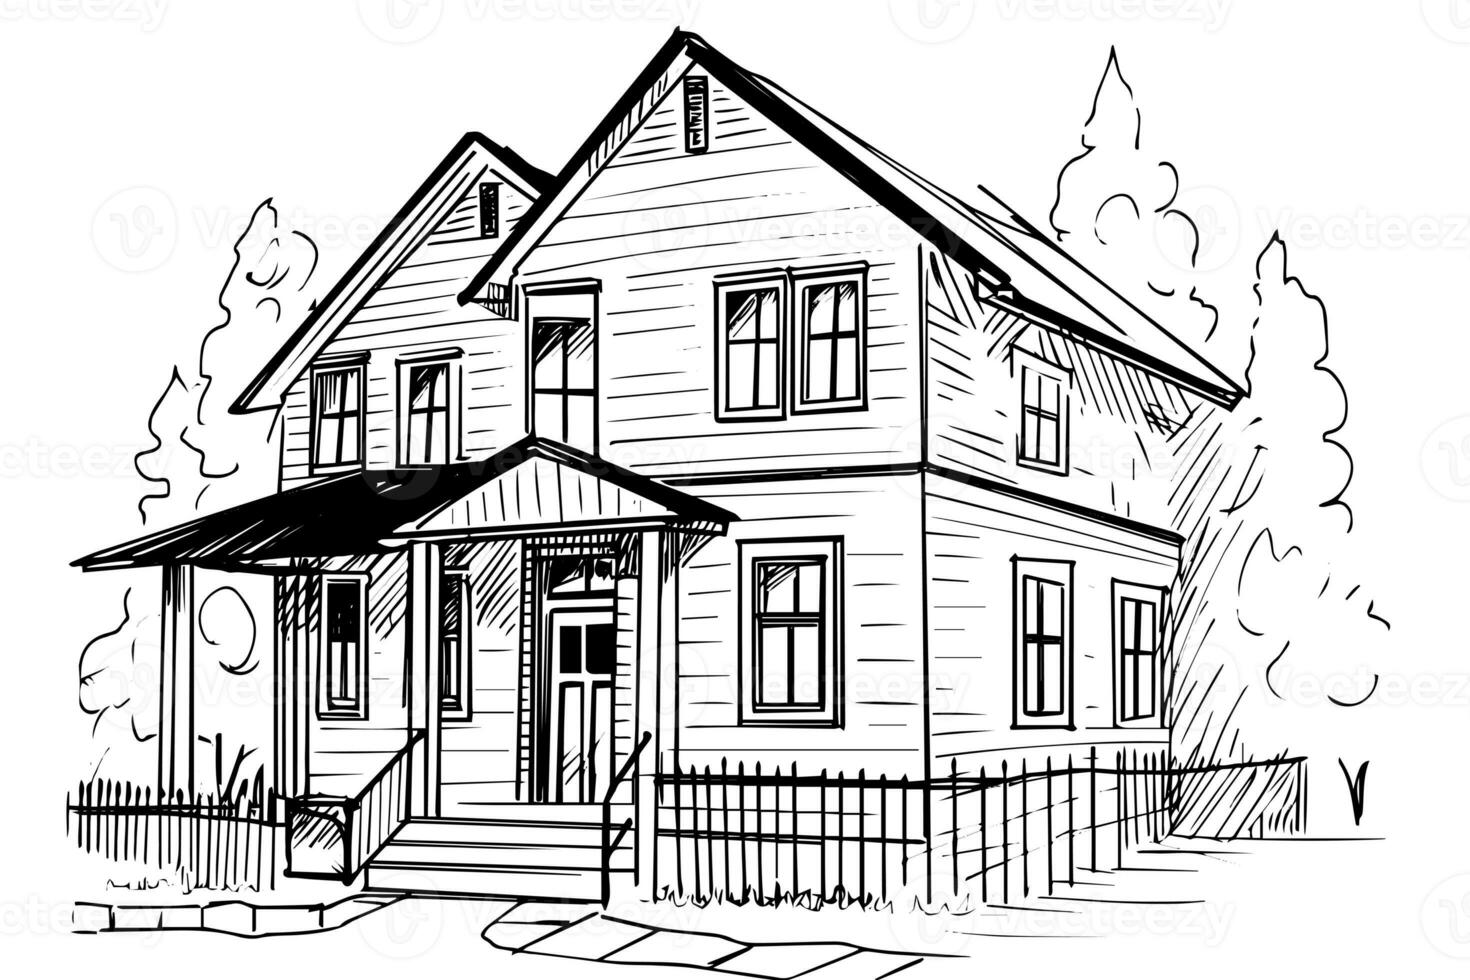 Vector black and white ink sketch of vintage wooden house. Engraving style illustration. photo